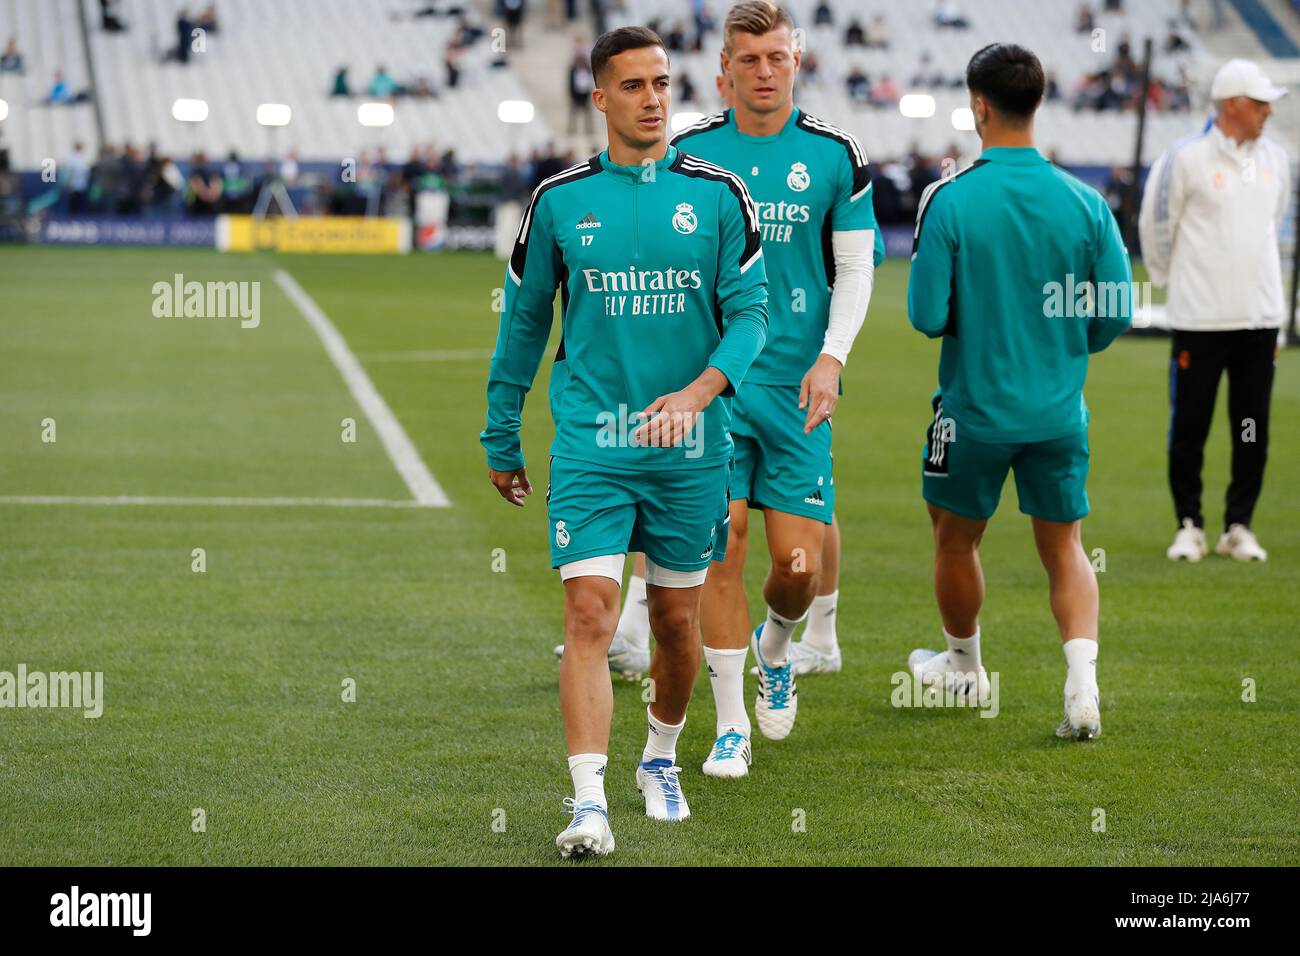 Saint-Denis, France. 27th May, 2022. Lucas Vazquez (Real) Football/Soccer :  UEFA Champions League Final Matchday -1 Real Madrid training session at the  Stade de France in Saint-Denis, France . Credit: Mutsu Kawamori/AFLO/Alamy